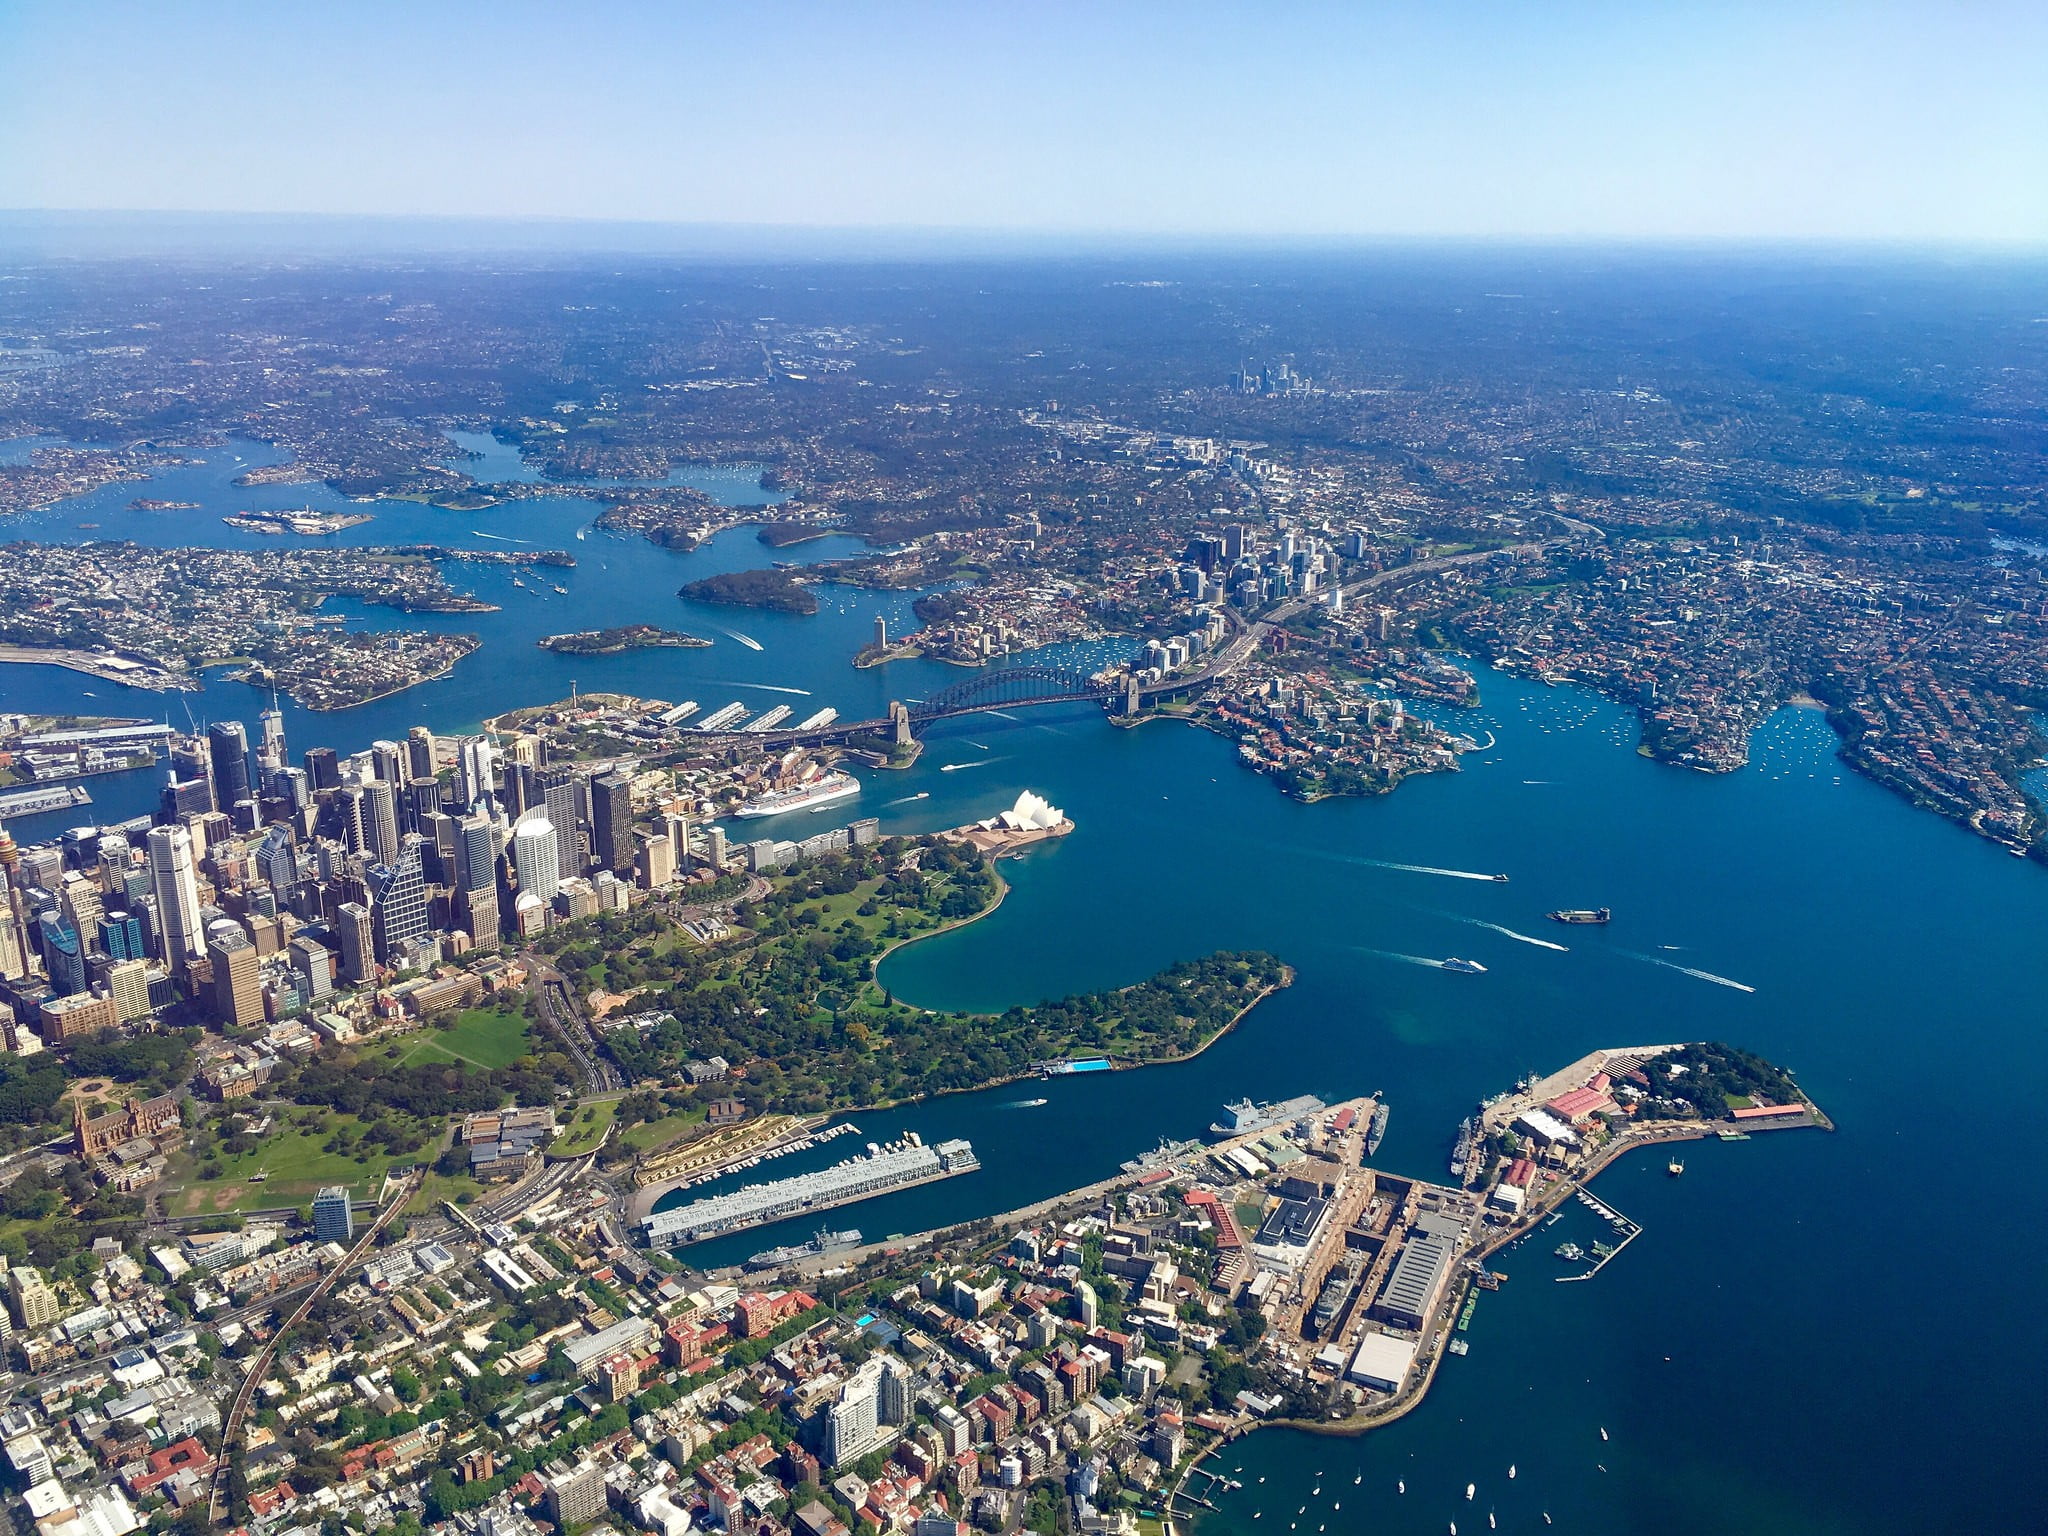 aerial photography of concrete buildings near body of water, Australia, Sydney, aerial view, city